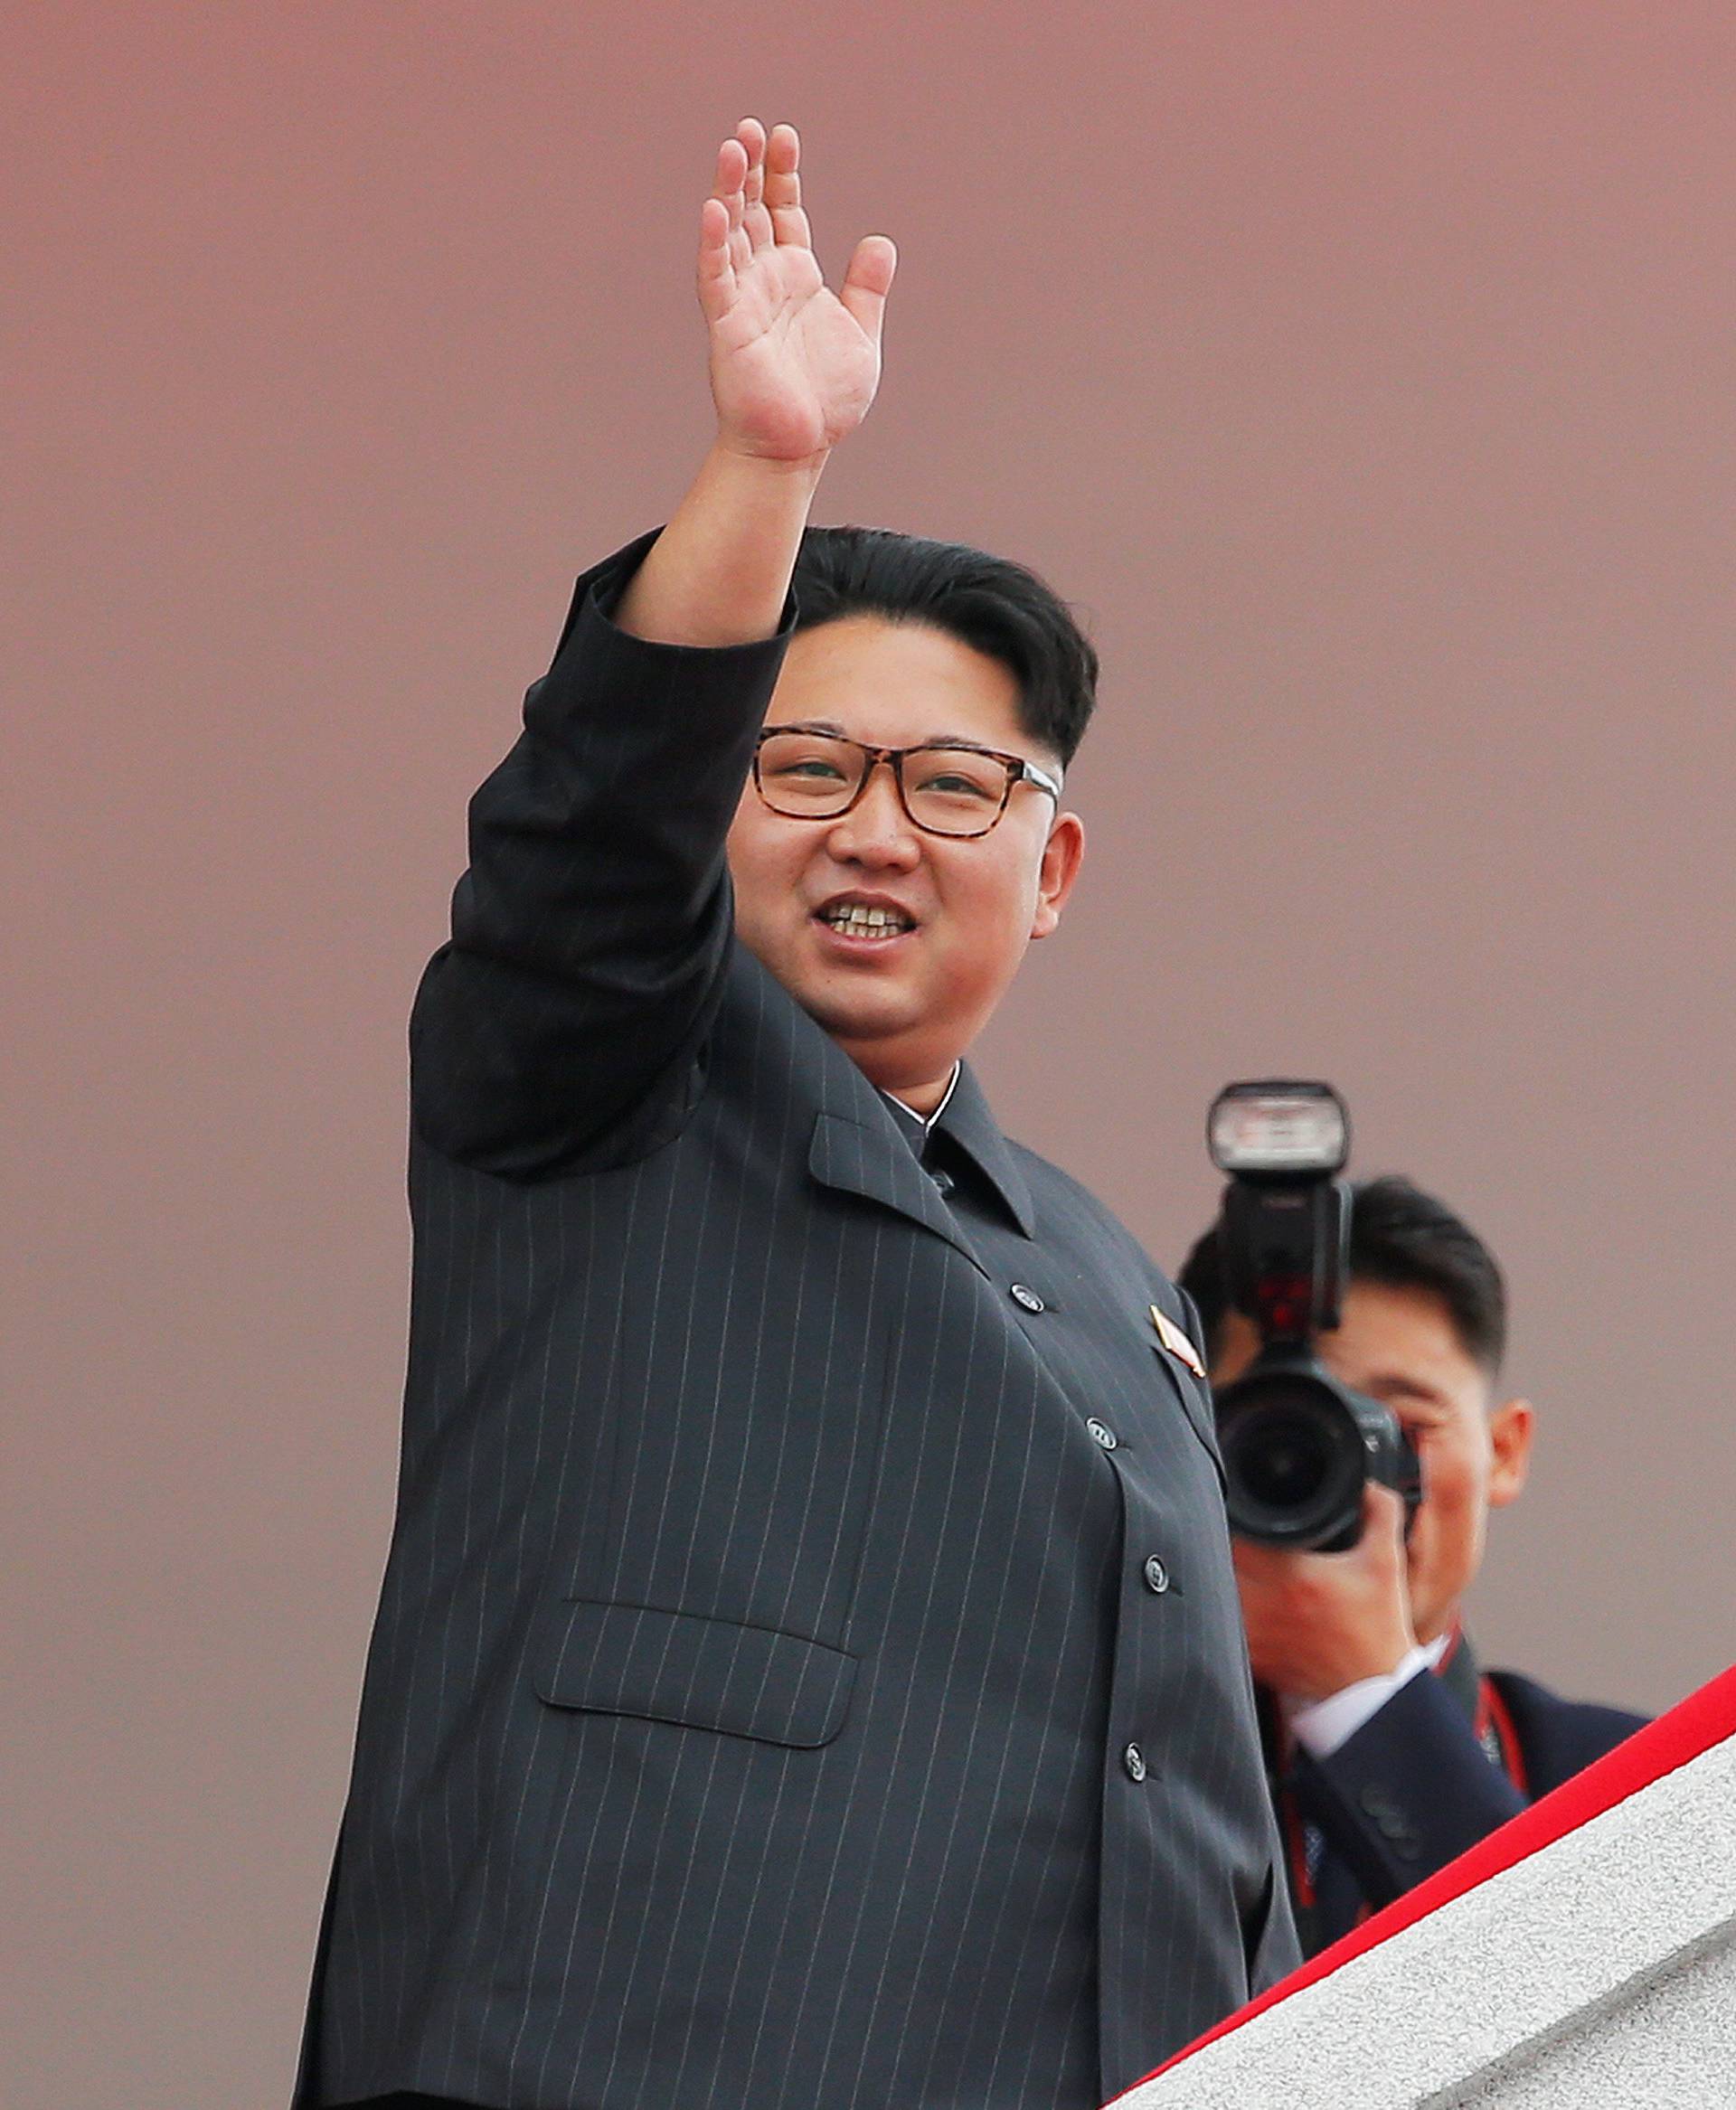 North Korean leader Kim Jong Un waves to the crowd as he presides over a mass rally and parade in Pyongyang